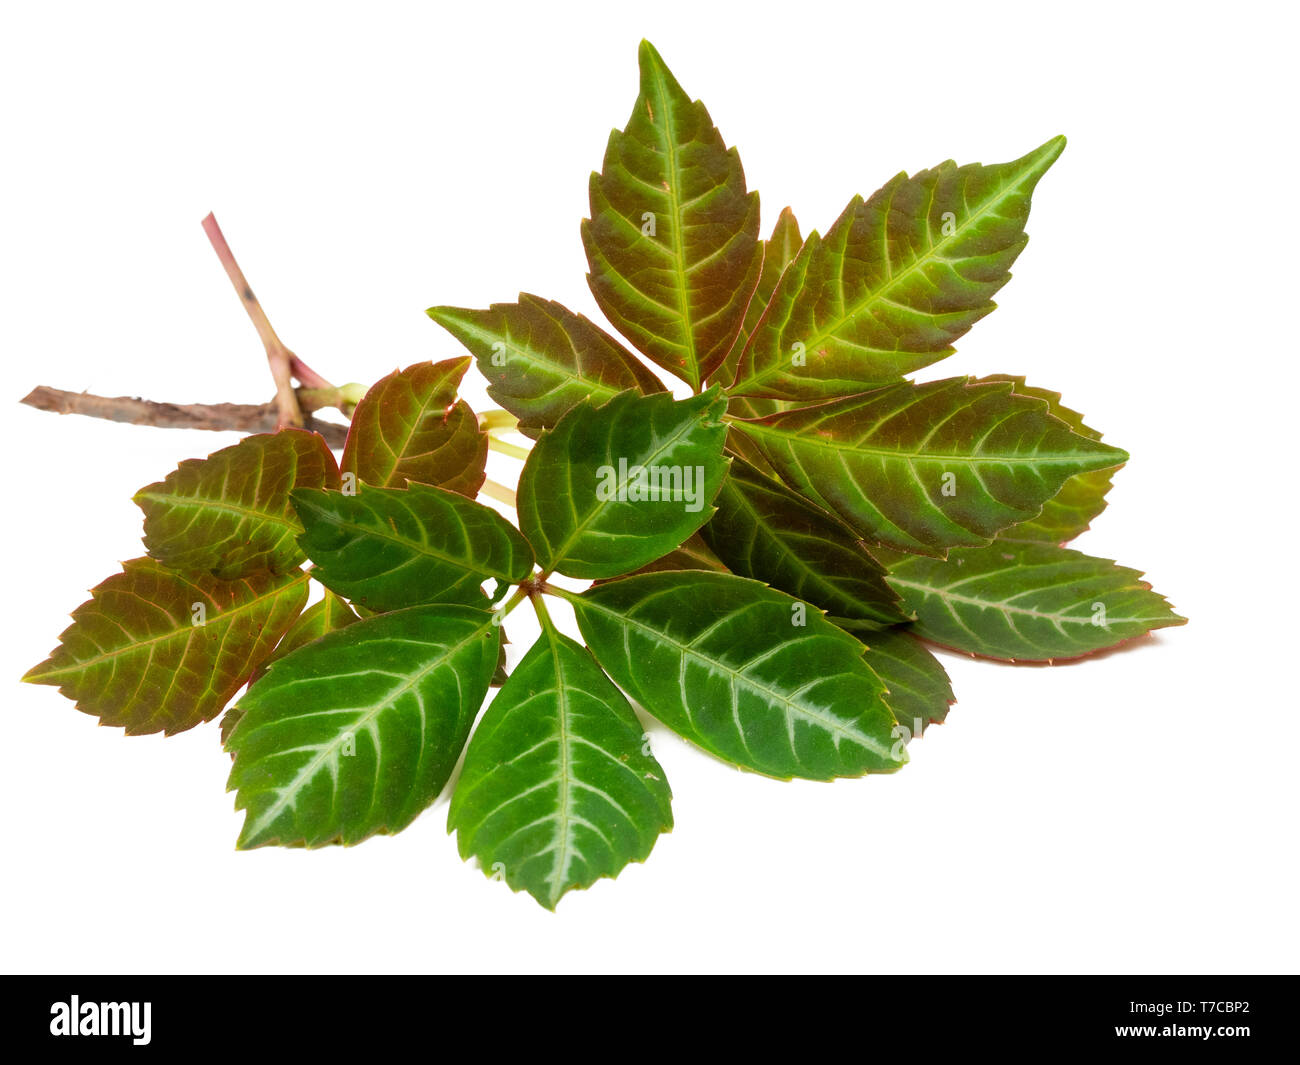 Silver striped midribs and leaf veins of the foliage of the hardy, woody climber, Parthenocissus henryana, on a white background Stock Photo